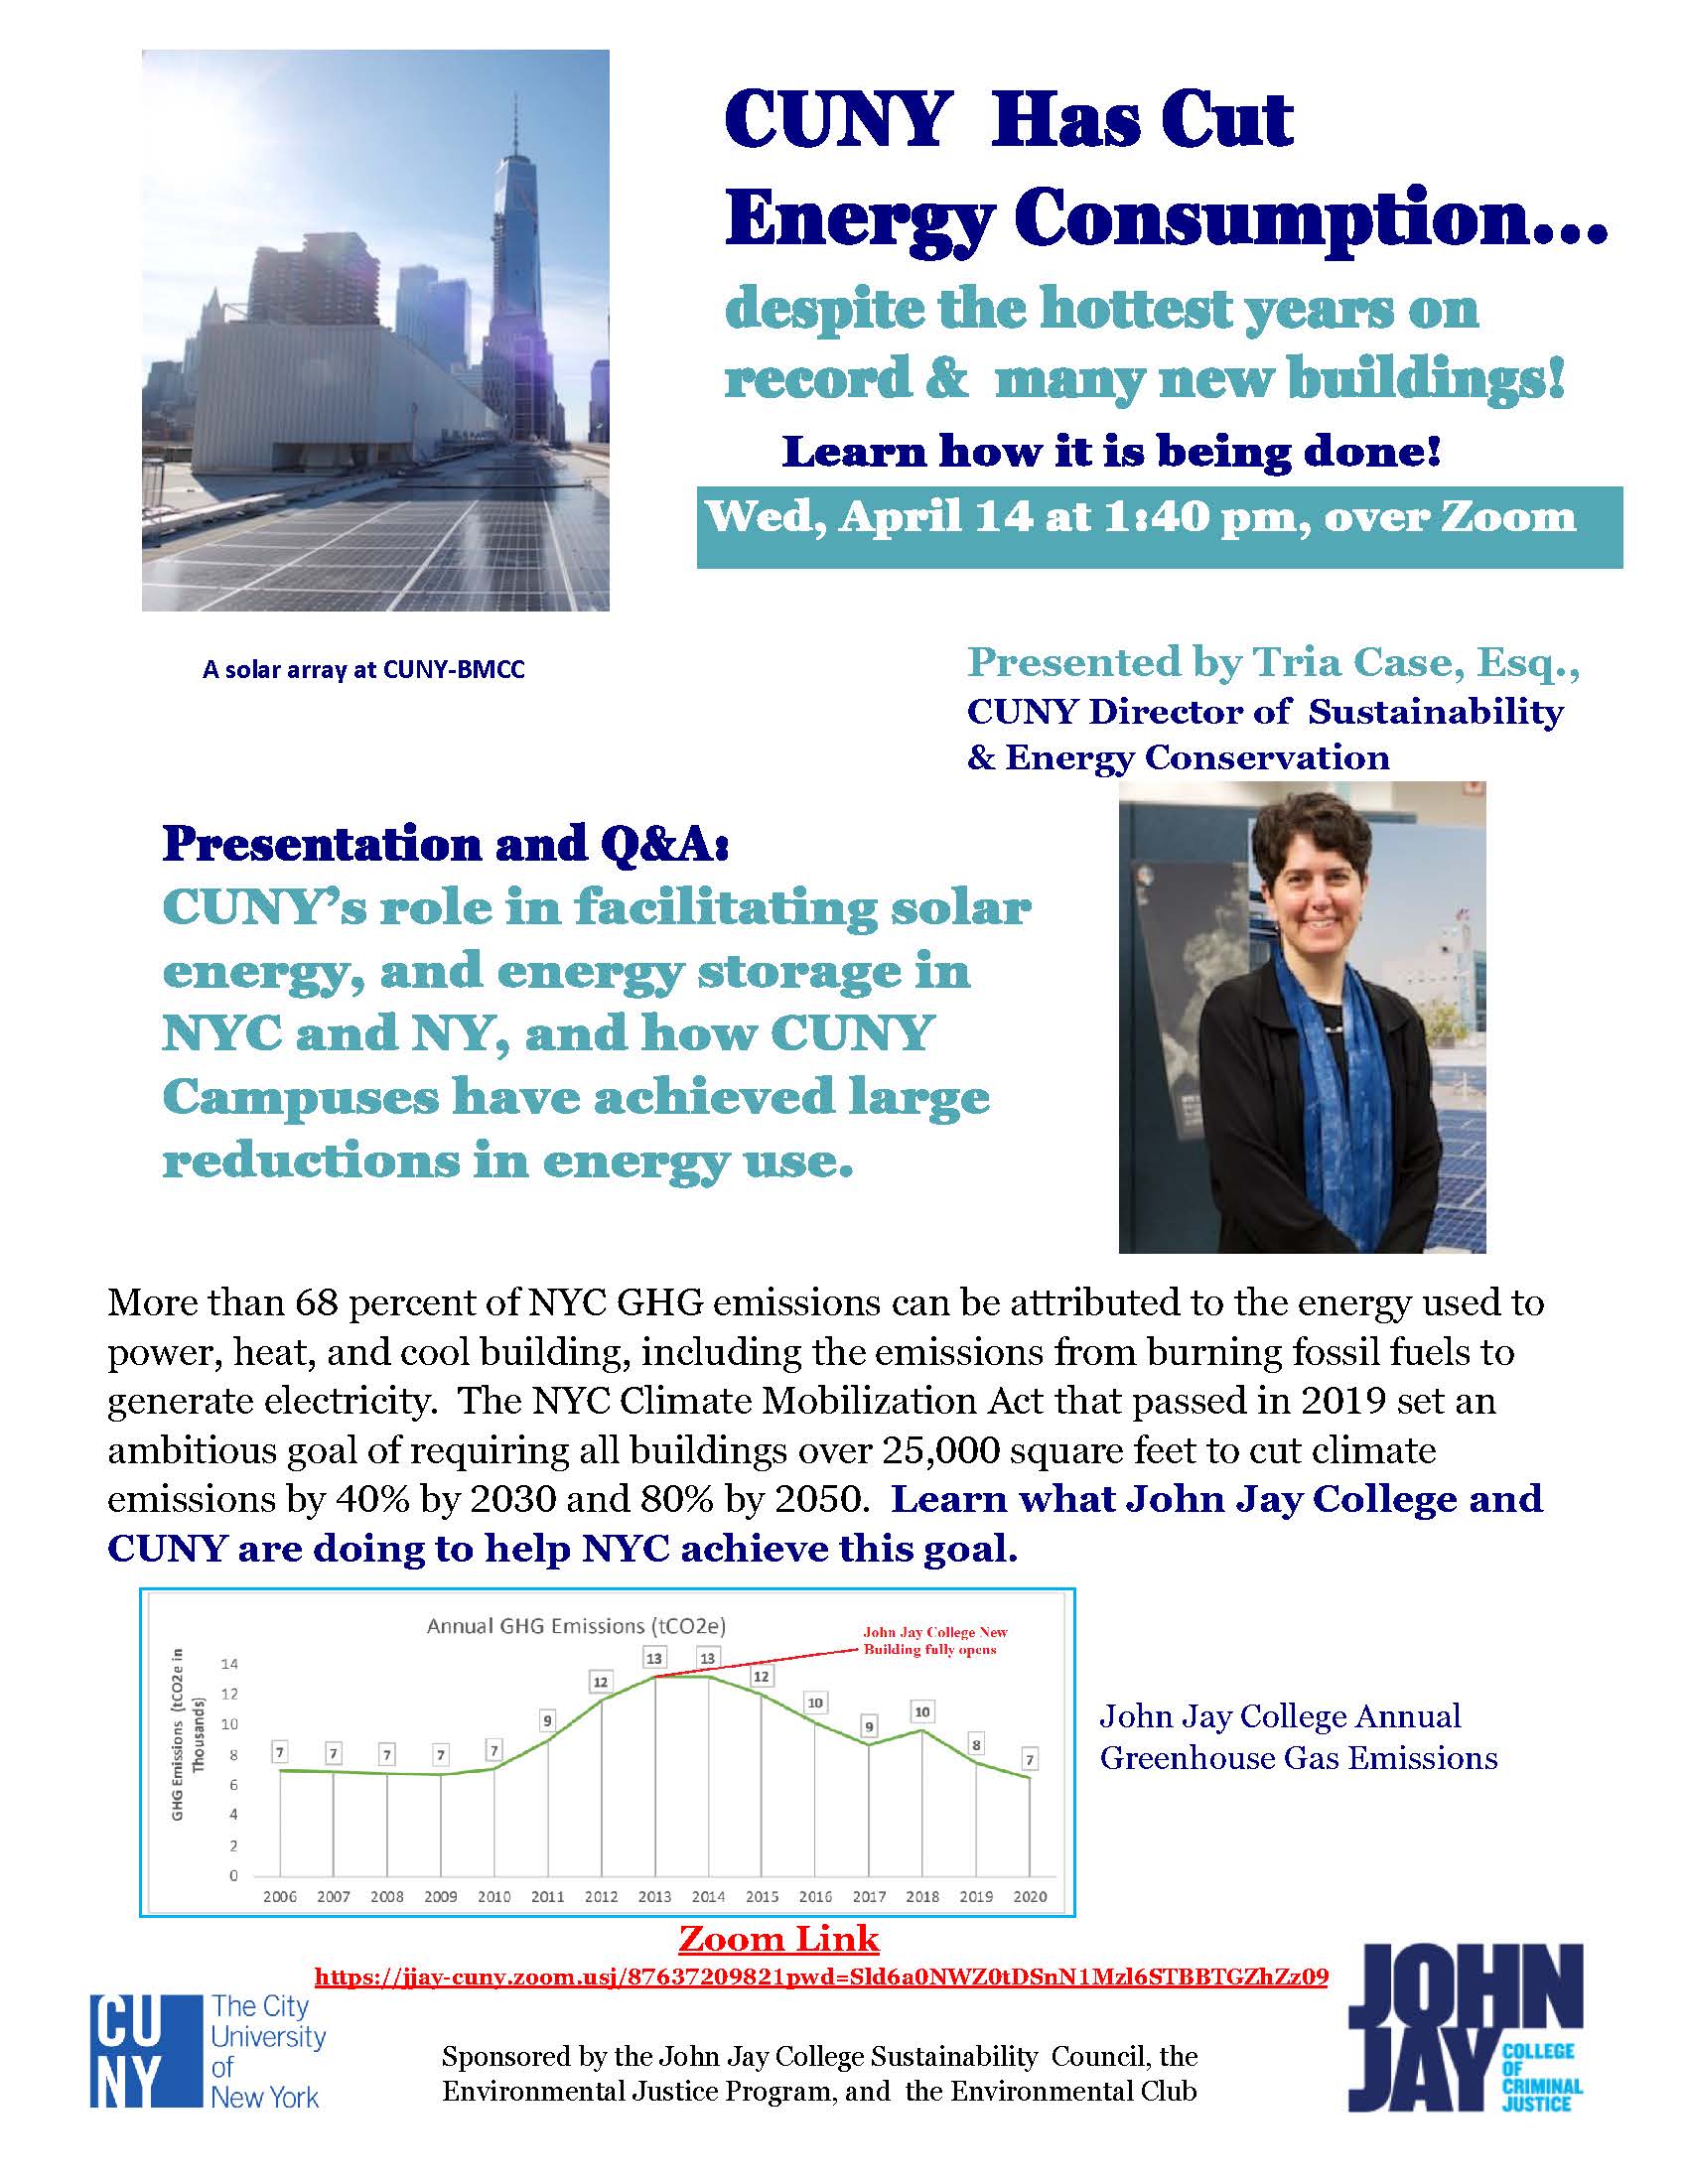 How CUNY is Reducing Emissions 40%